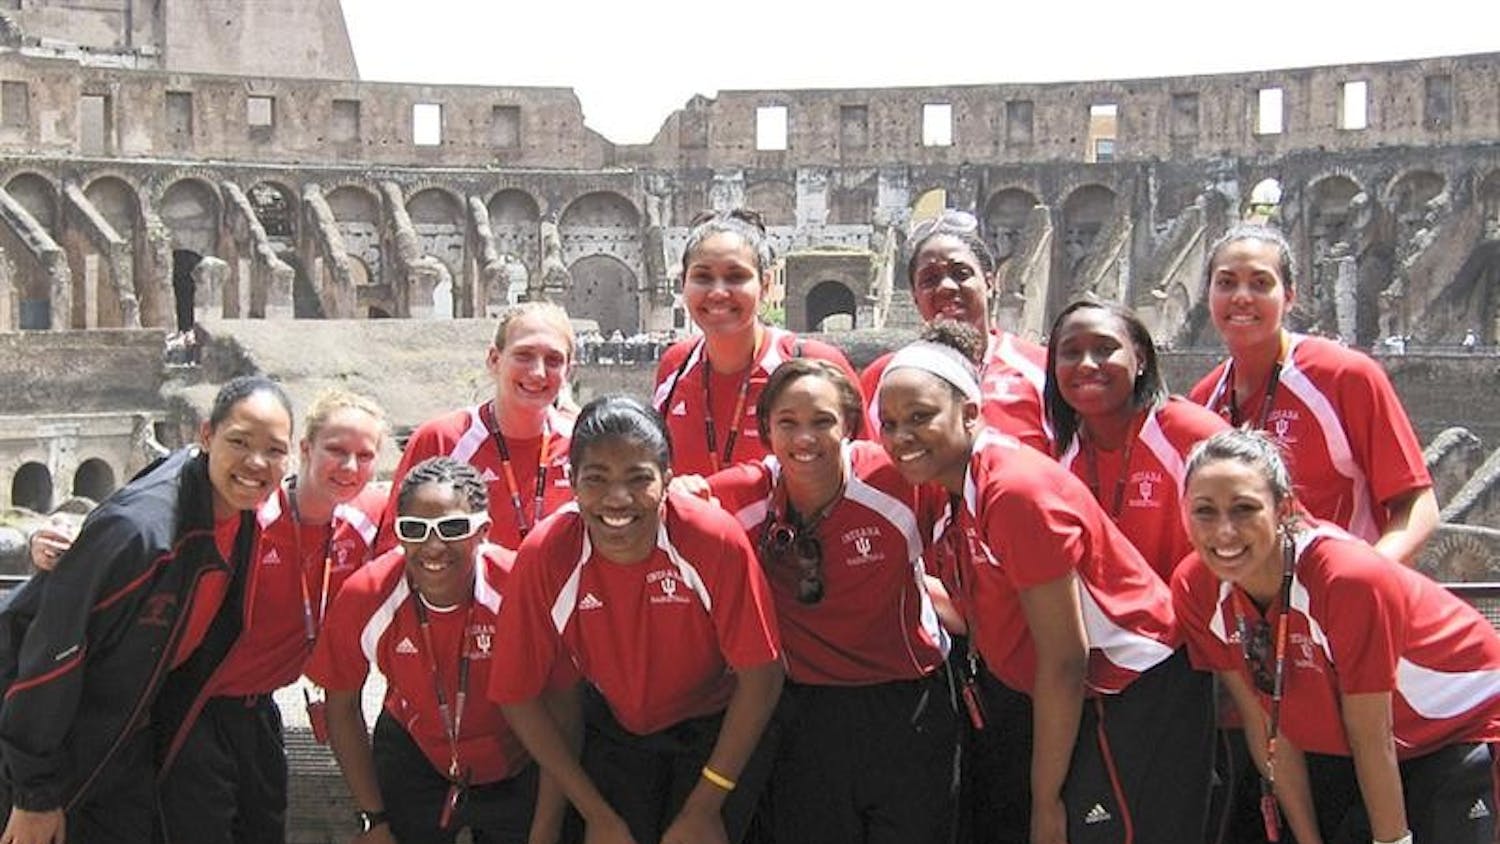 The IU womens basketball team poses for a photo in the Colosseum May 16 in Rome, Italy. The team finished their ten day tour of Italy with a 4-0 record.